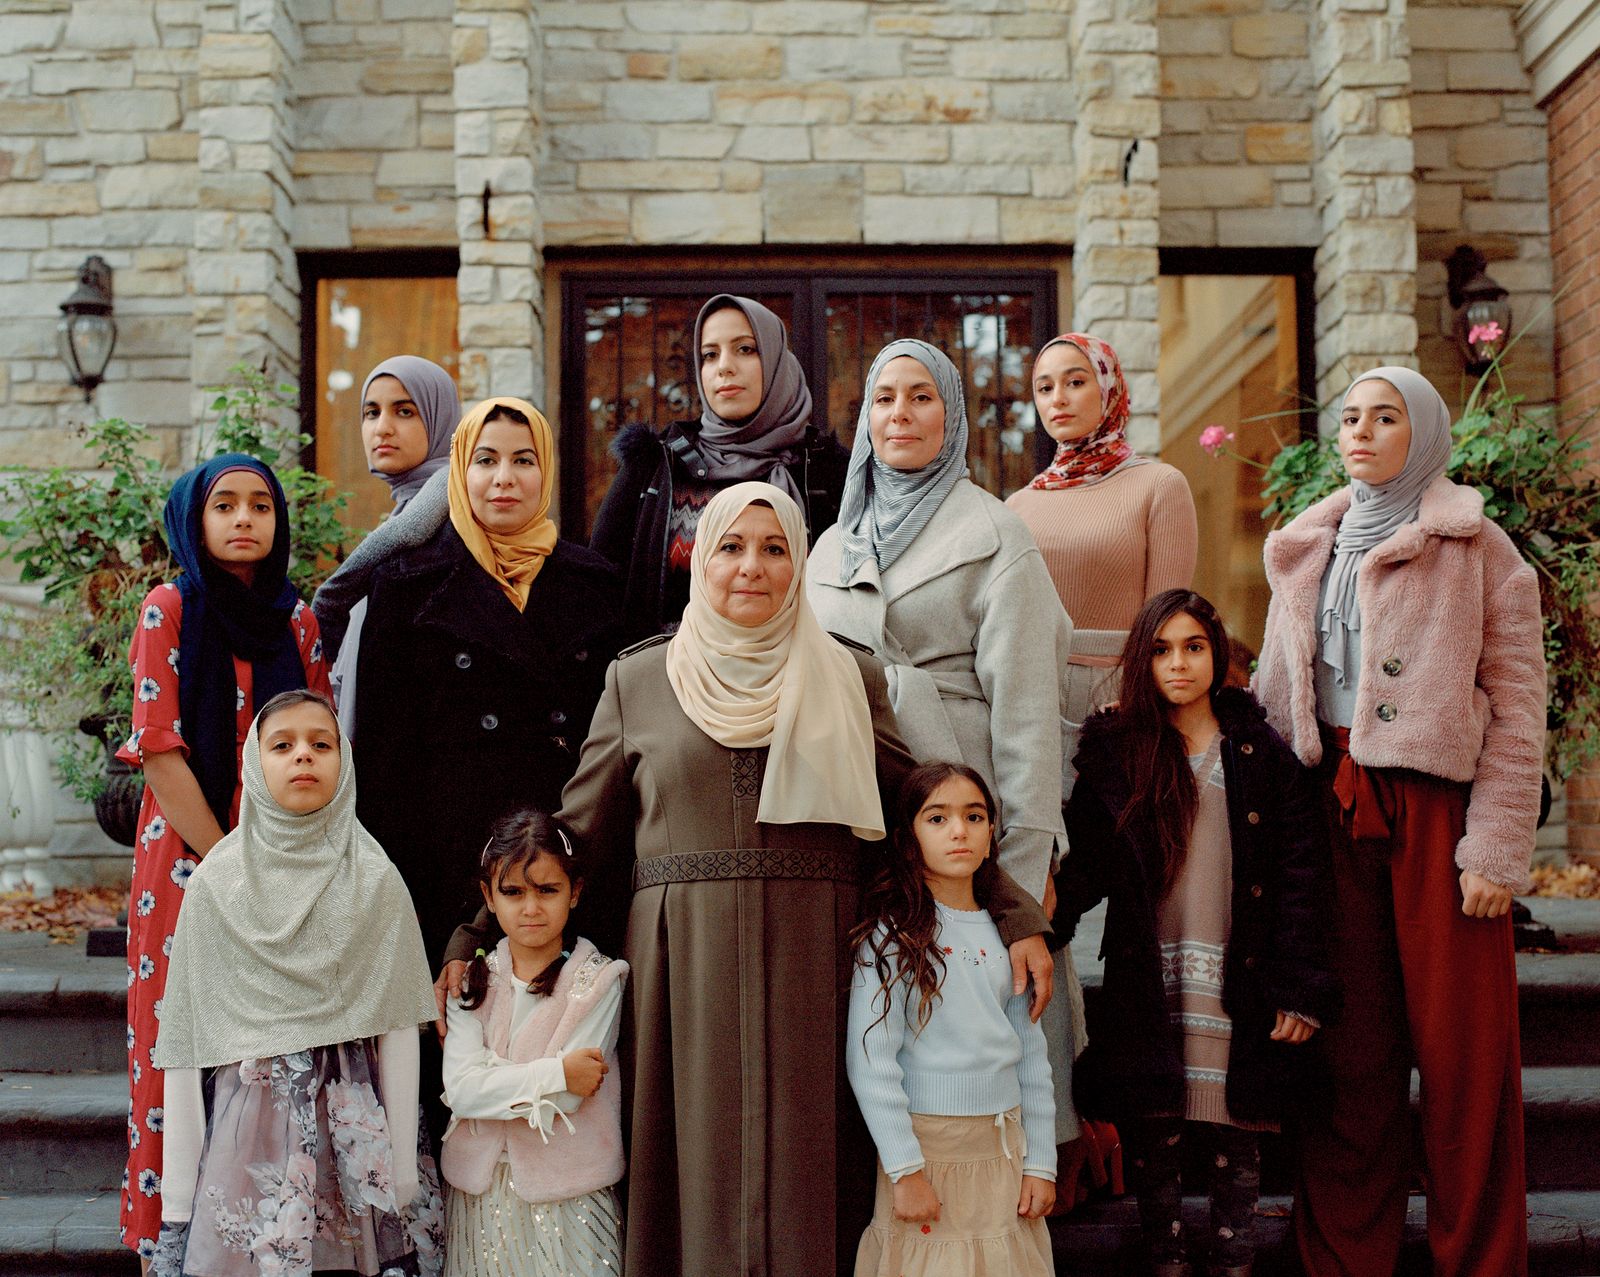 © Alia Youssef - Image from the Generations photography project